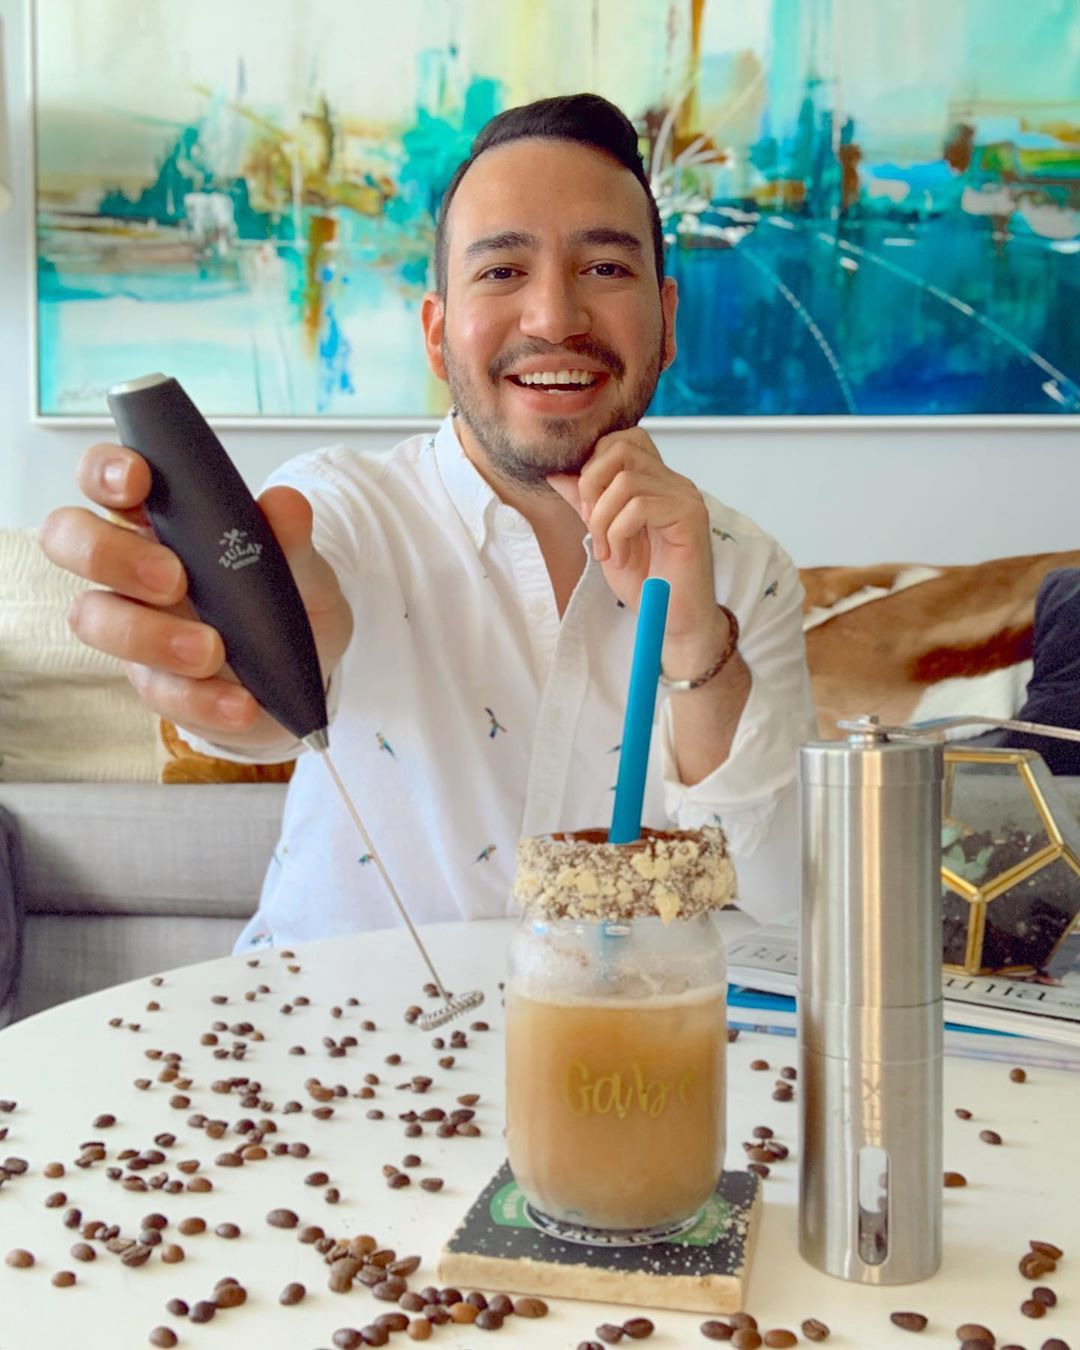 Gabriel Soto Stimulates His Brain Every Morning By Drinking A Frothy Coffee Using The Zulay Milk Frother and Coffee Grinder! - Zulay Kitchen